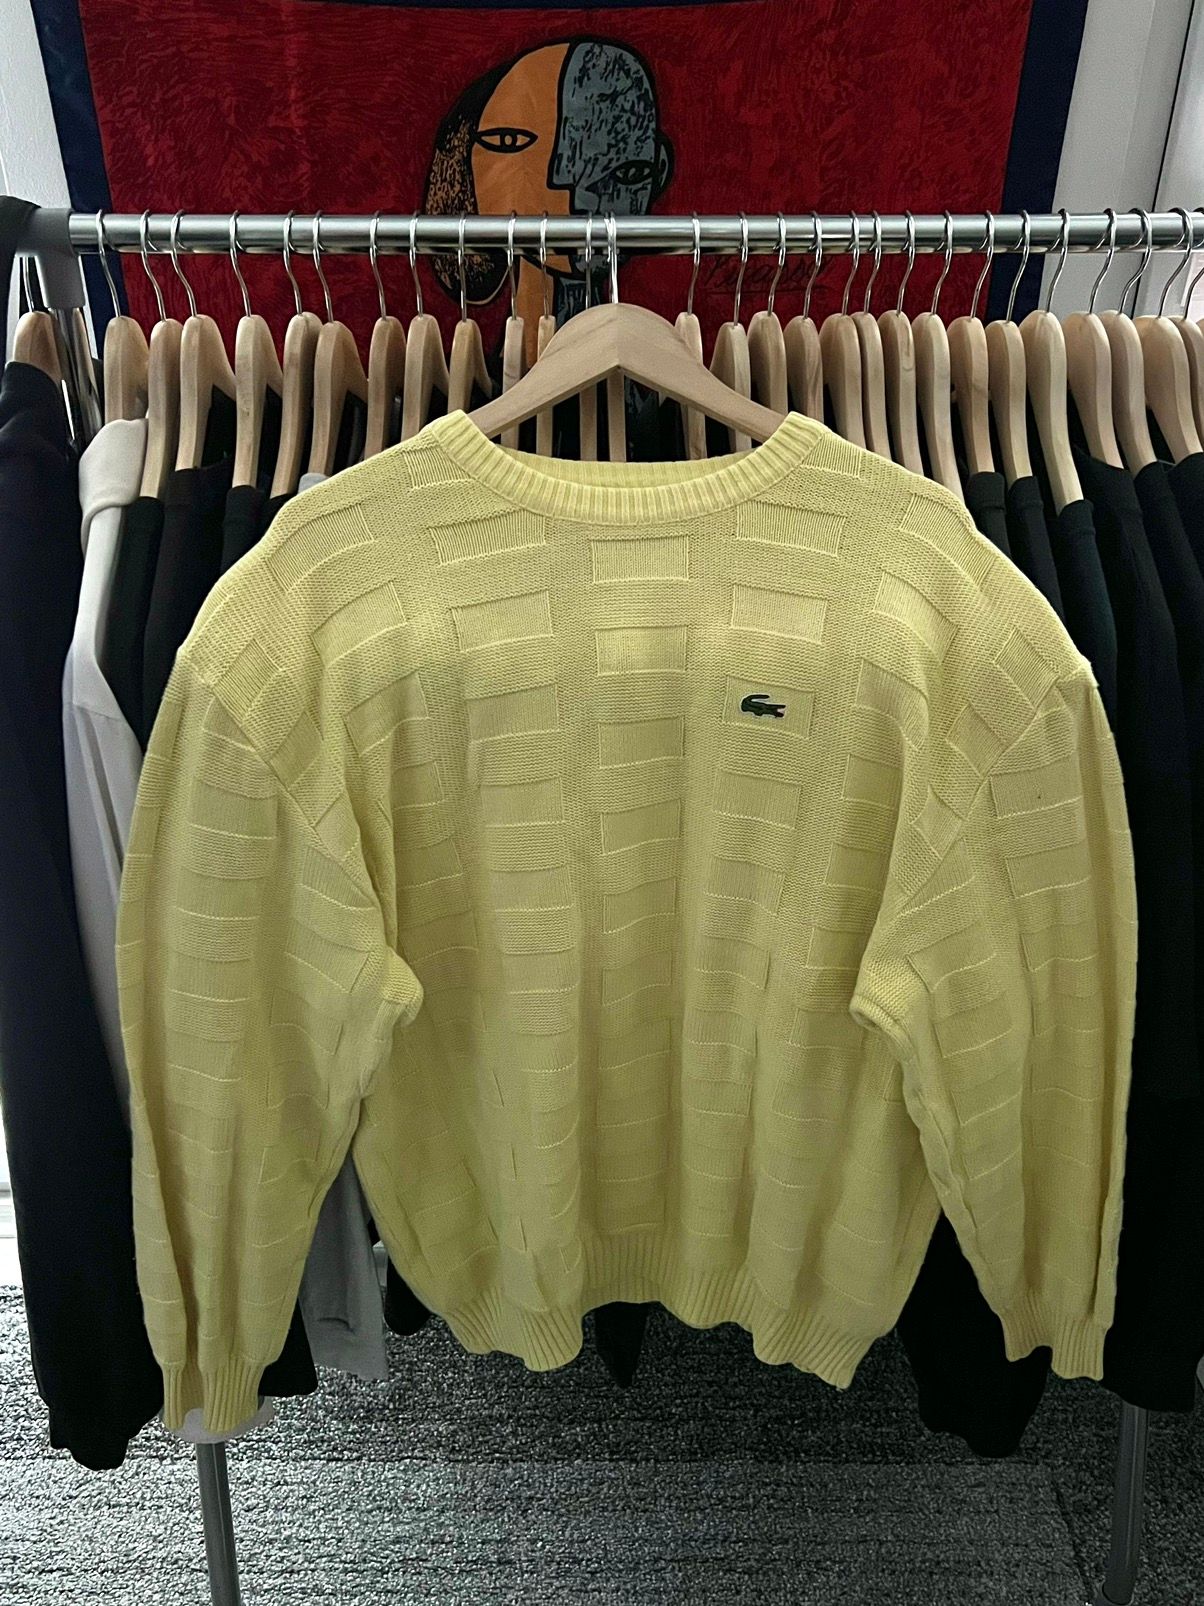 Pre-owned Coloured Cable Knit Sweater X Lacoste Vintage Yellow Knit Sweater Oversized Small Logo Xl